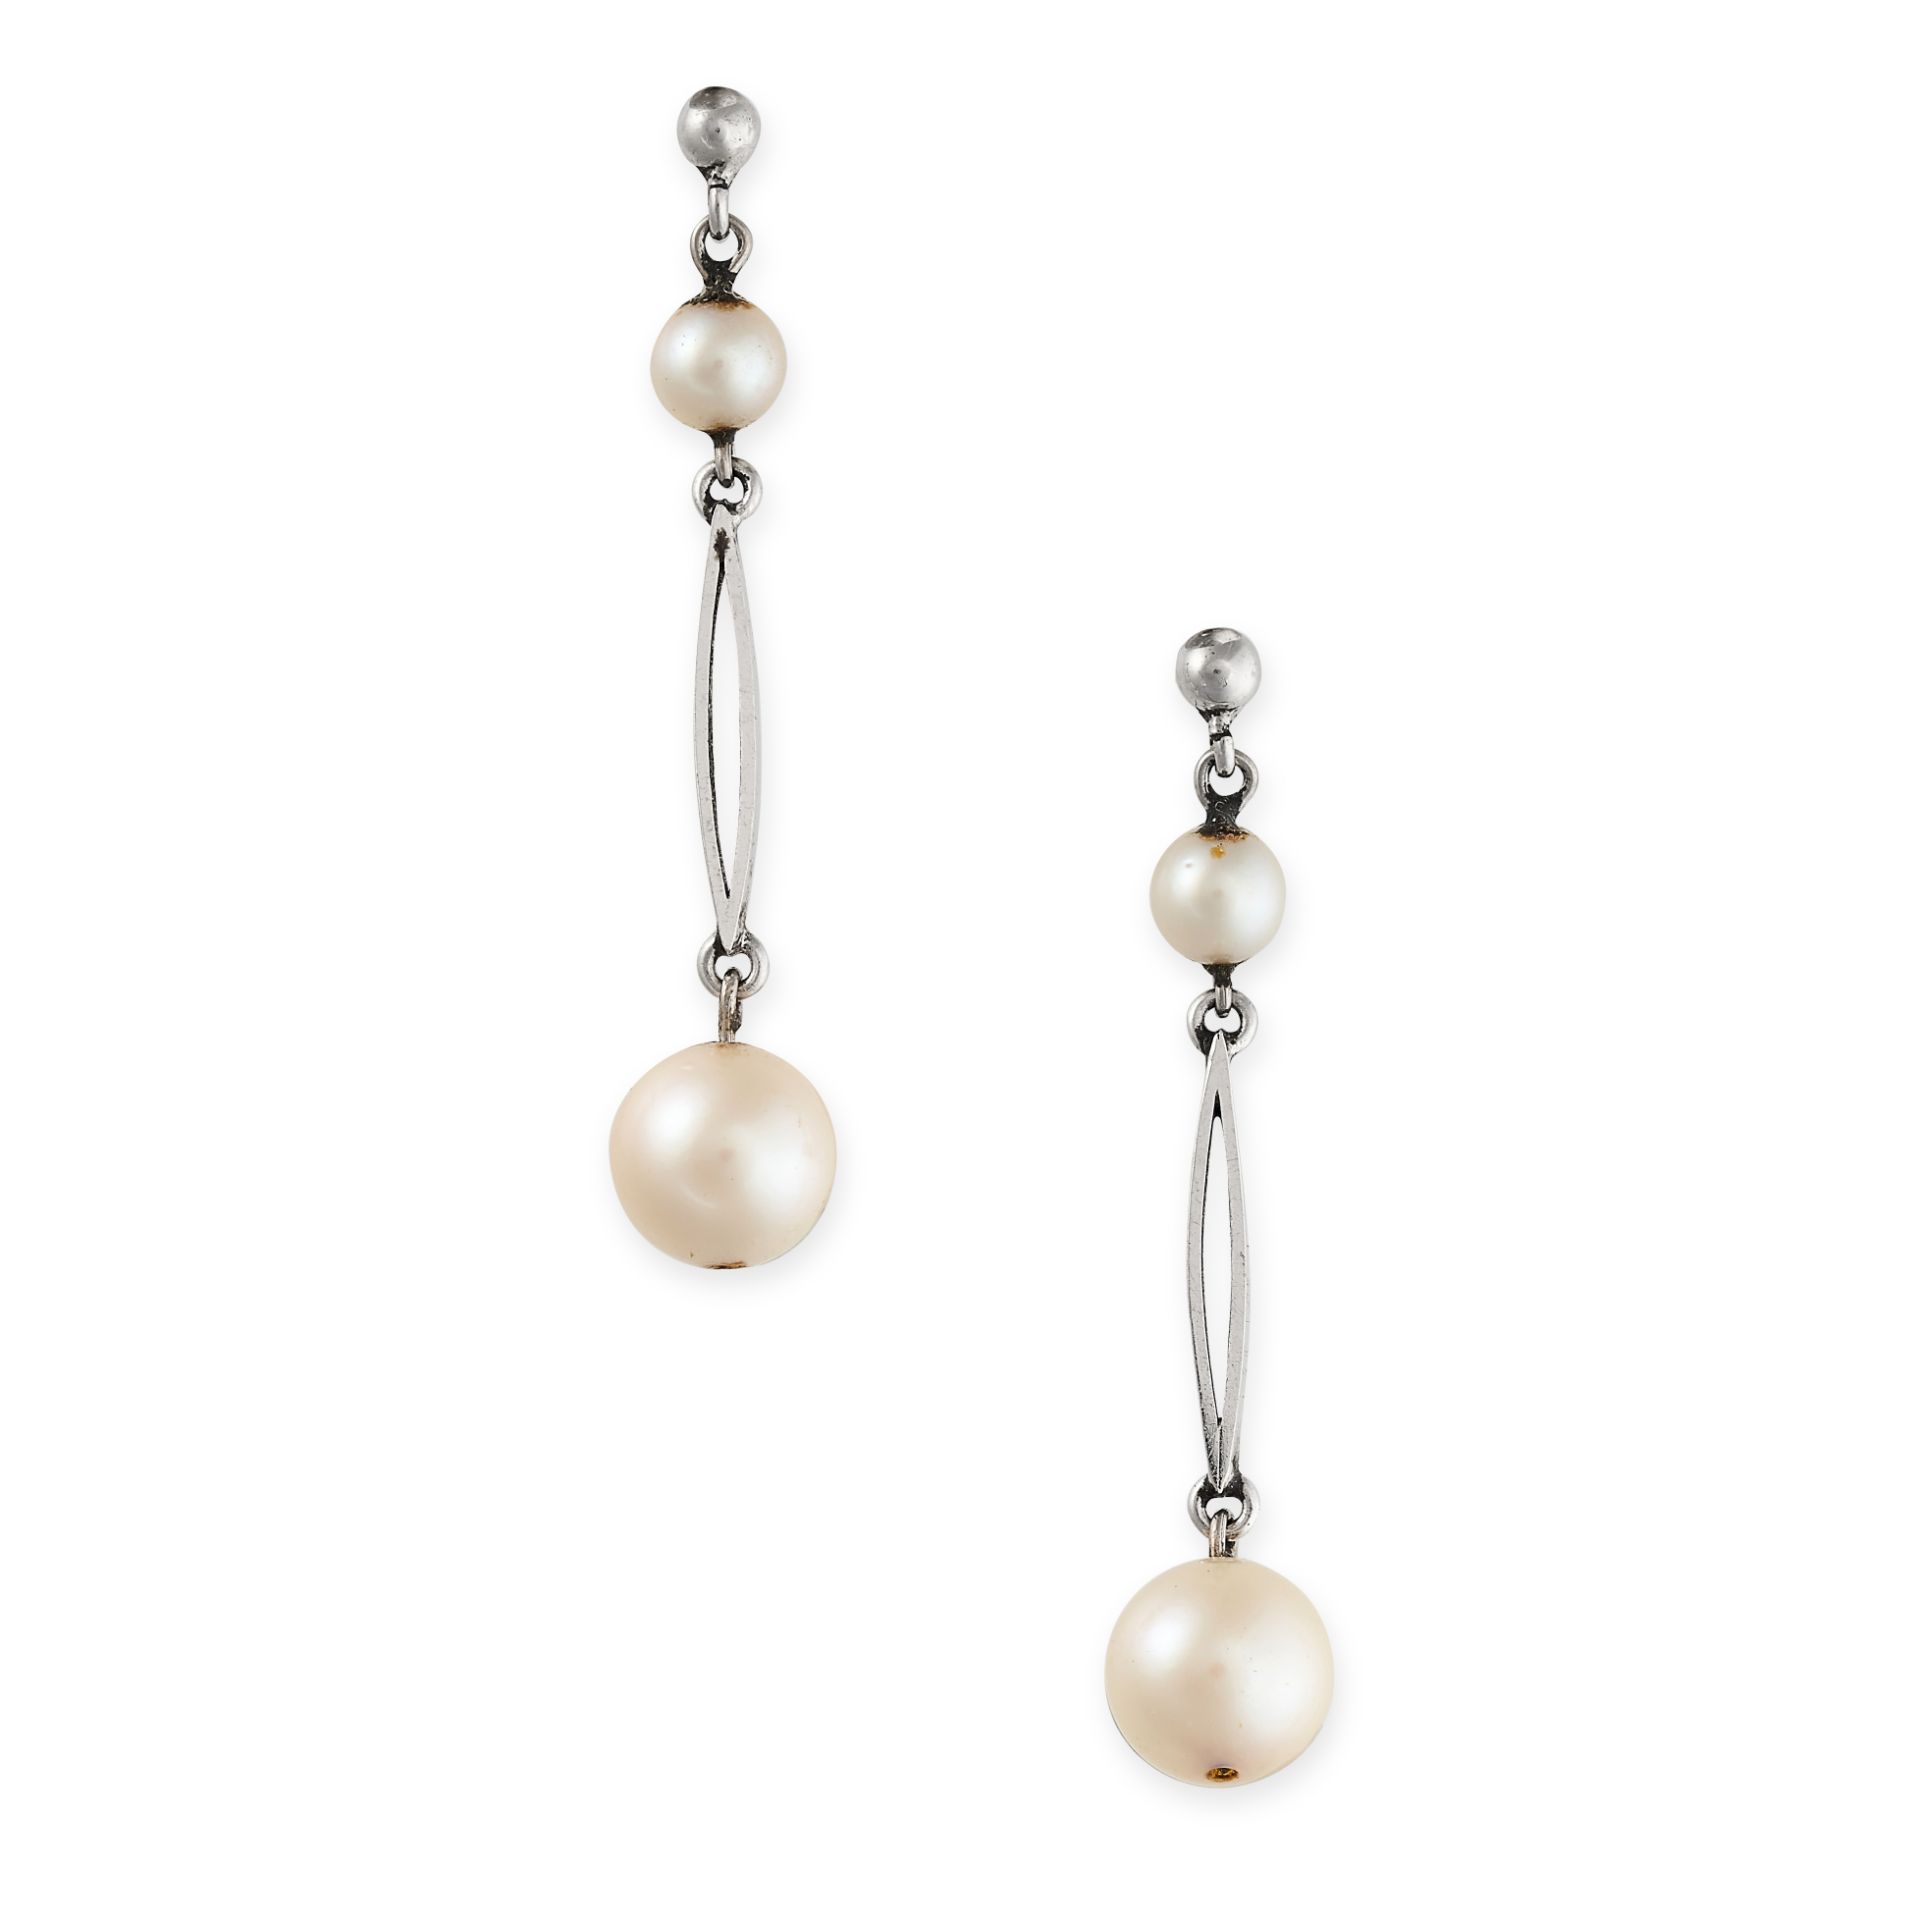 A PAIR OF PEARL DROP EARRINGS in 9ct gold, each set with two graduated pearls, stamped 9C, 3.2cm,